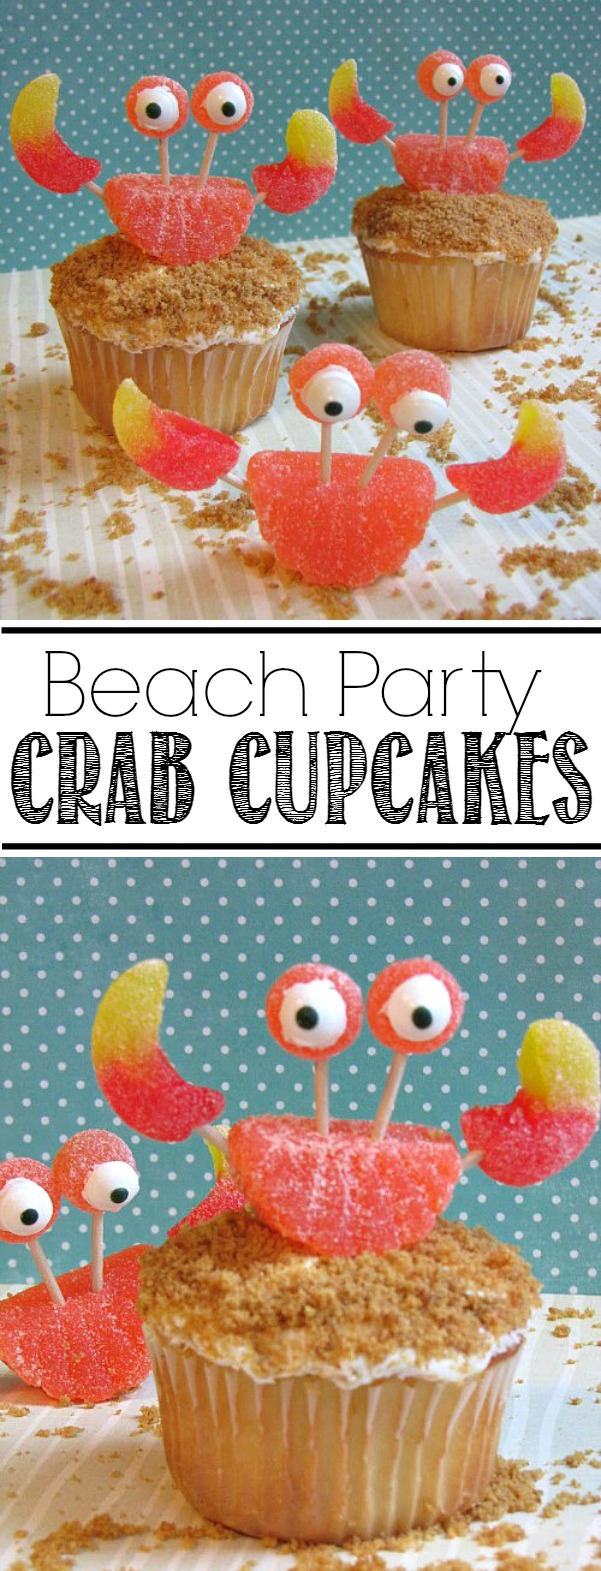 These crab cupcakes are SO cute and perfect for a beach party or summer BBQ.